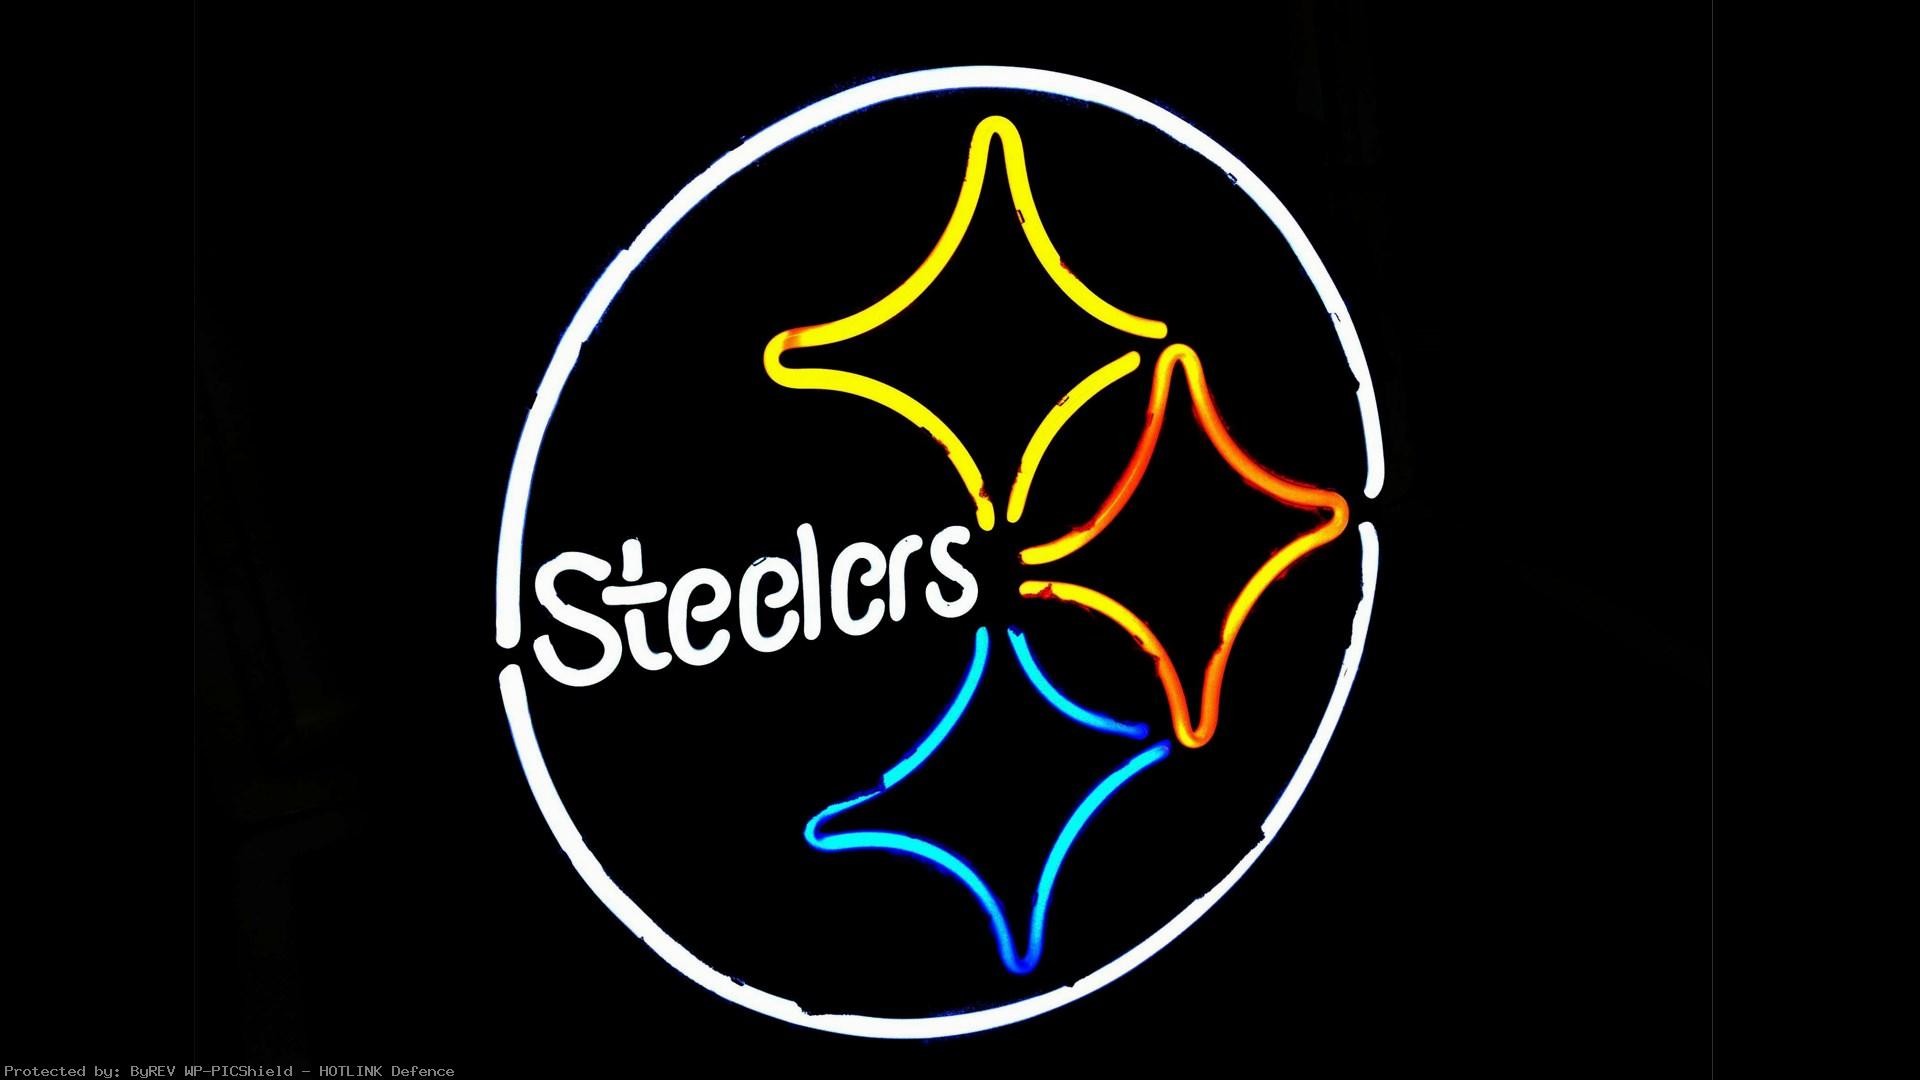 1920x1080 pittsburgh-steelers-1080p-high-quality-pittsburgh-steelers-category-